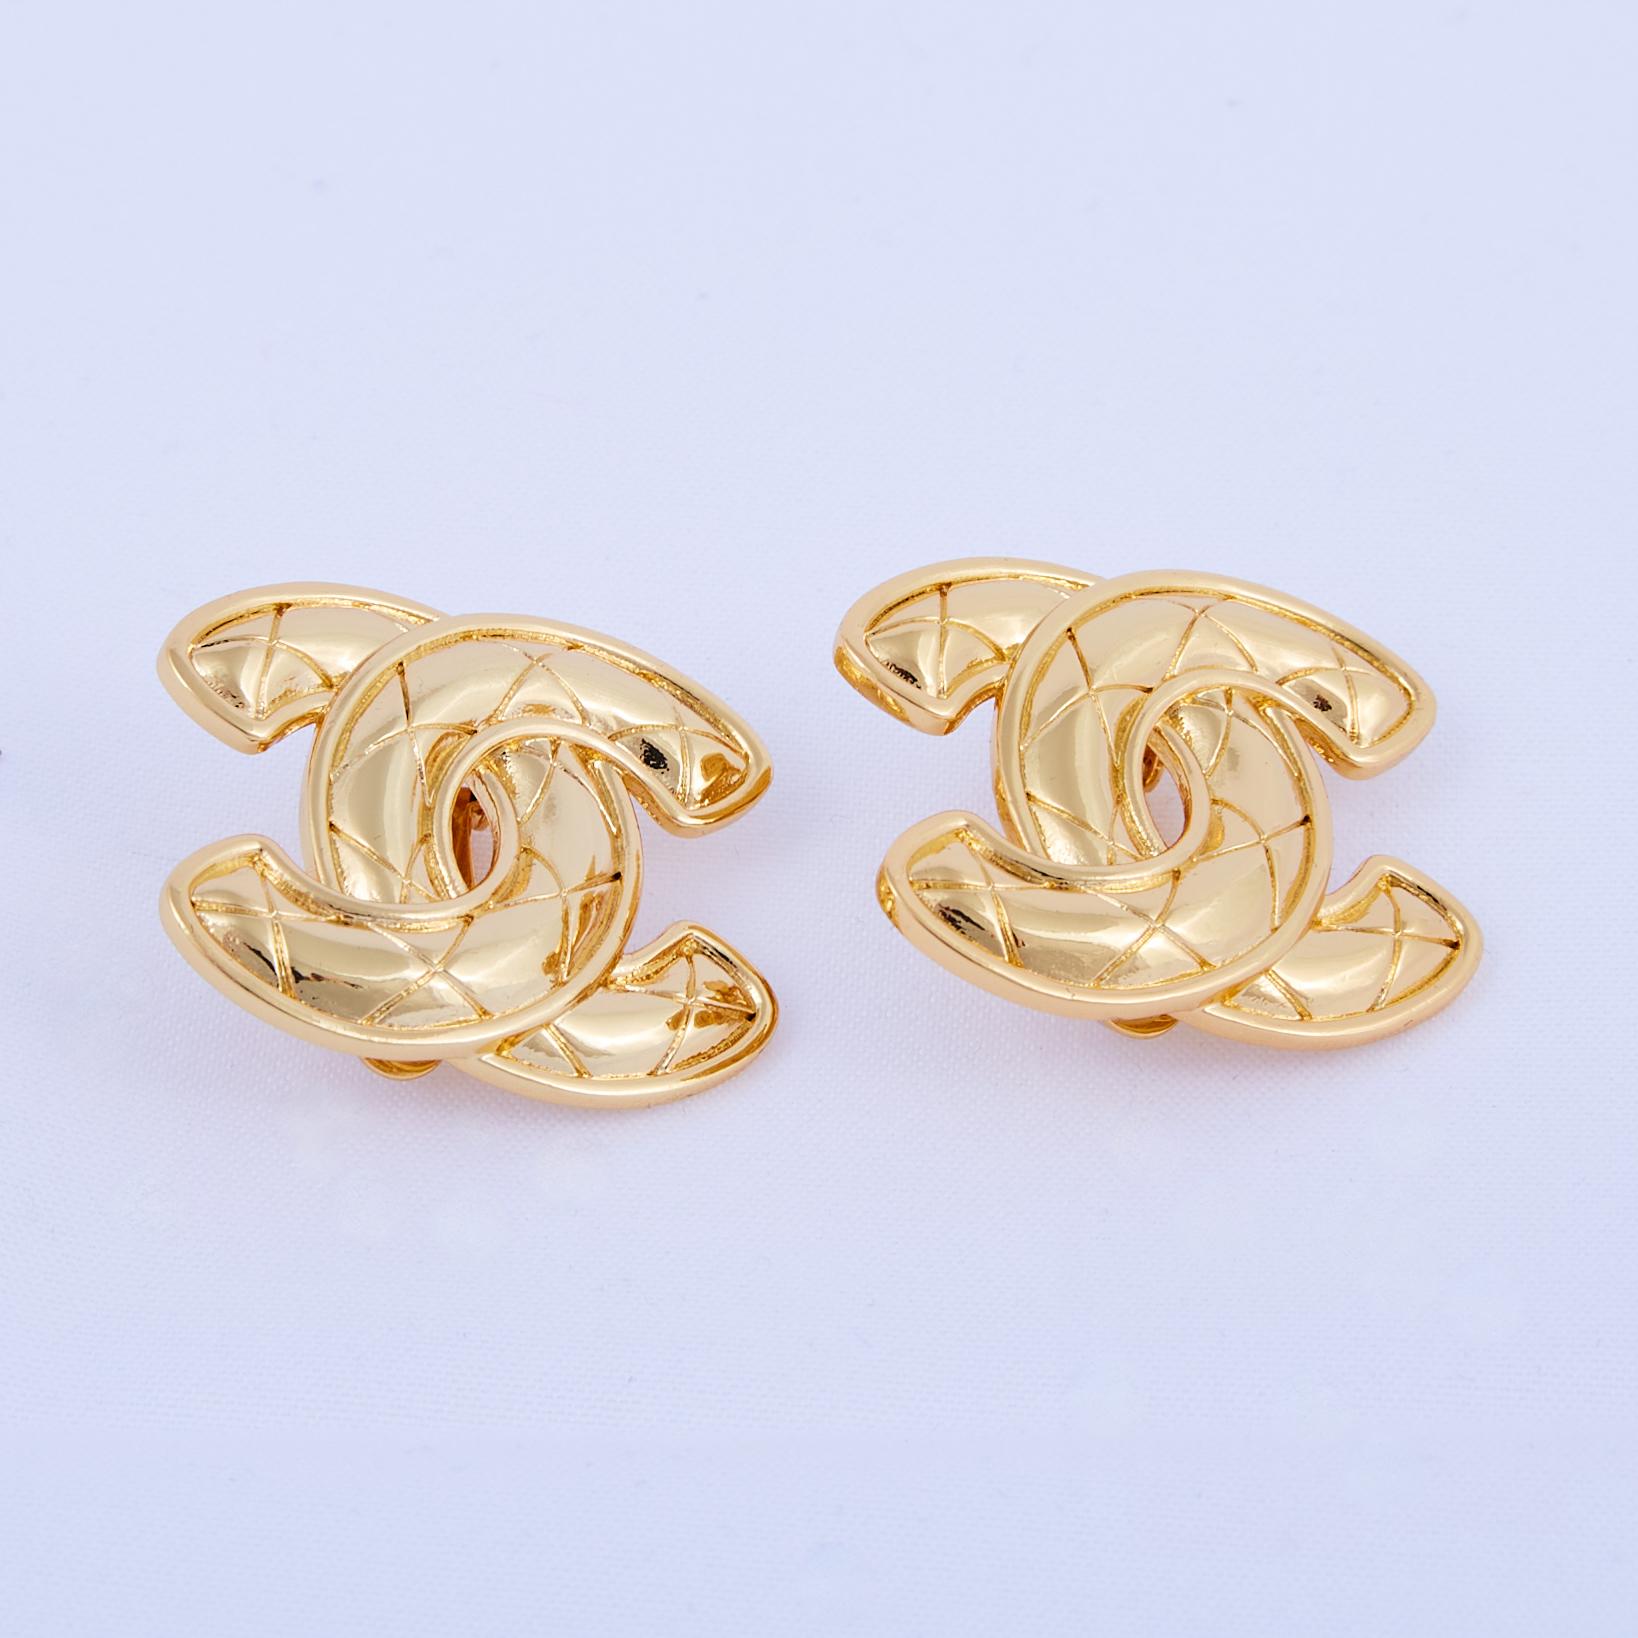 Designed by Coco Chanel in 1925, the interlocking CC logo became Chanel's signature. With a gold-plated brass construction finished with diamond quilting, these clip-on earrings display the iconic motif for an instantly recognizable look. Circa